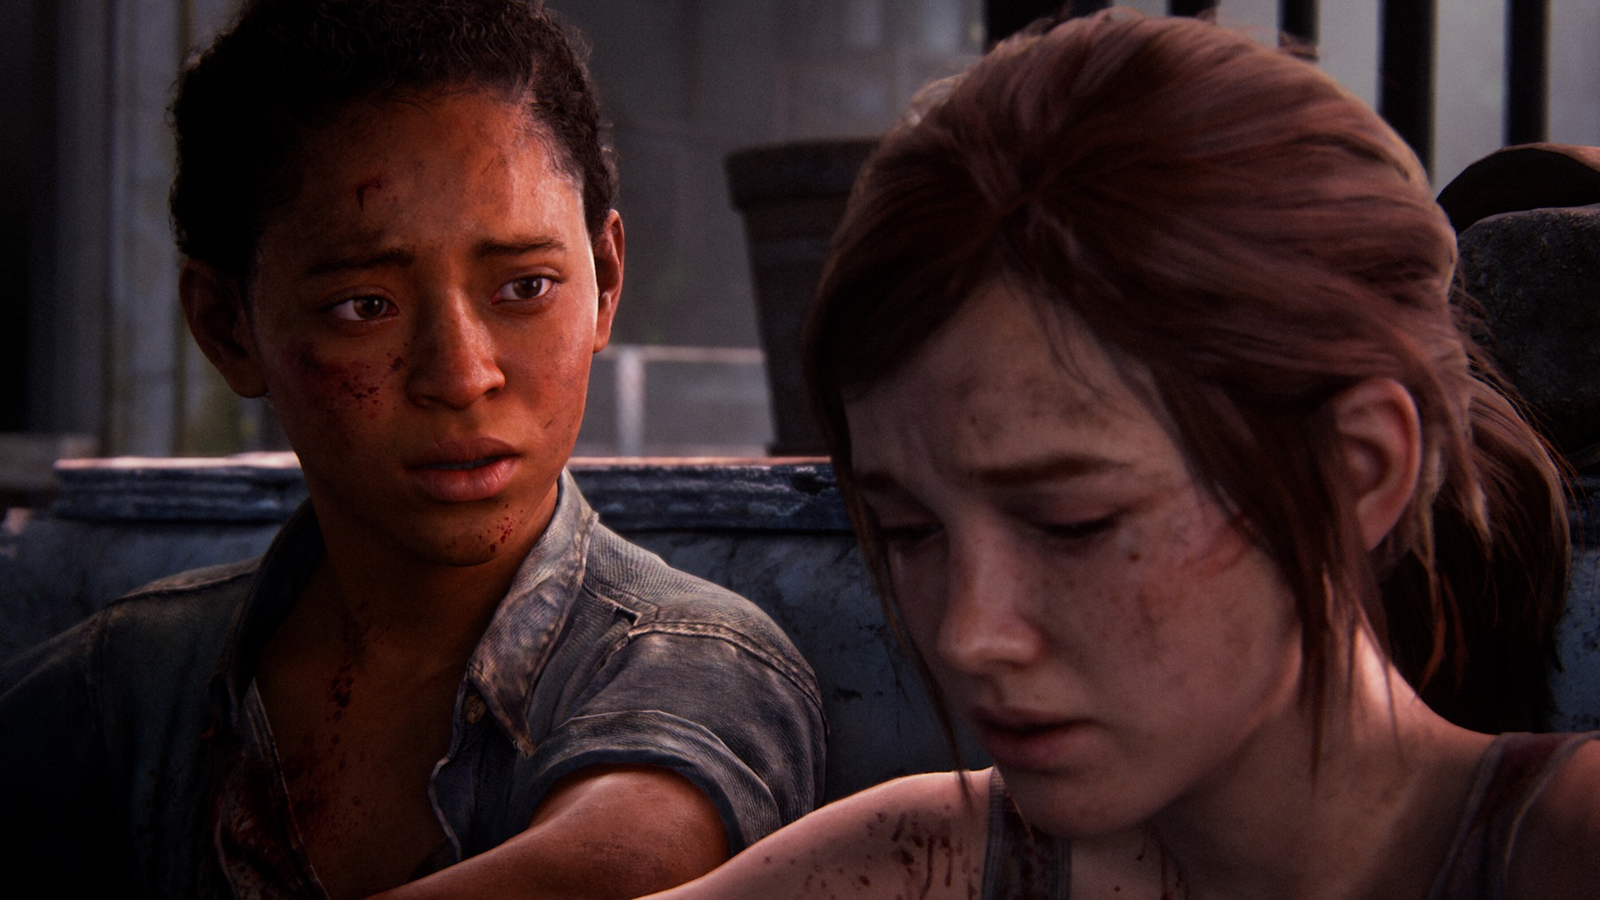 The Last of Us Part I PC System Requirements and Features Revealed Ahead of  Release